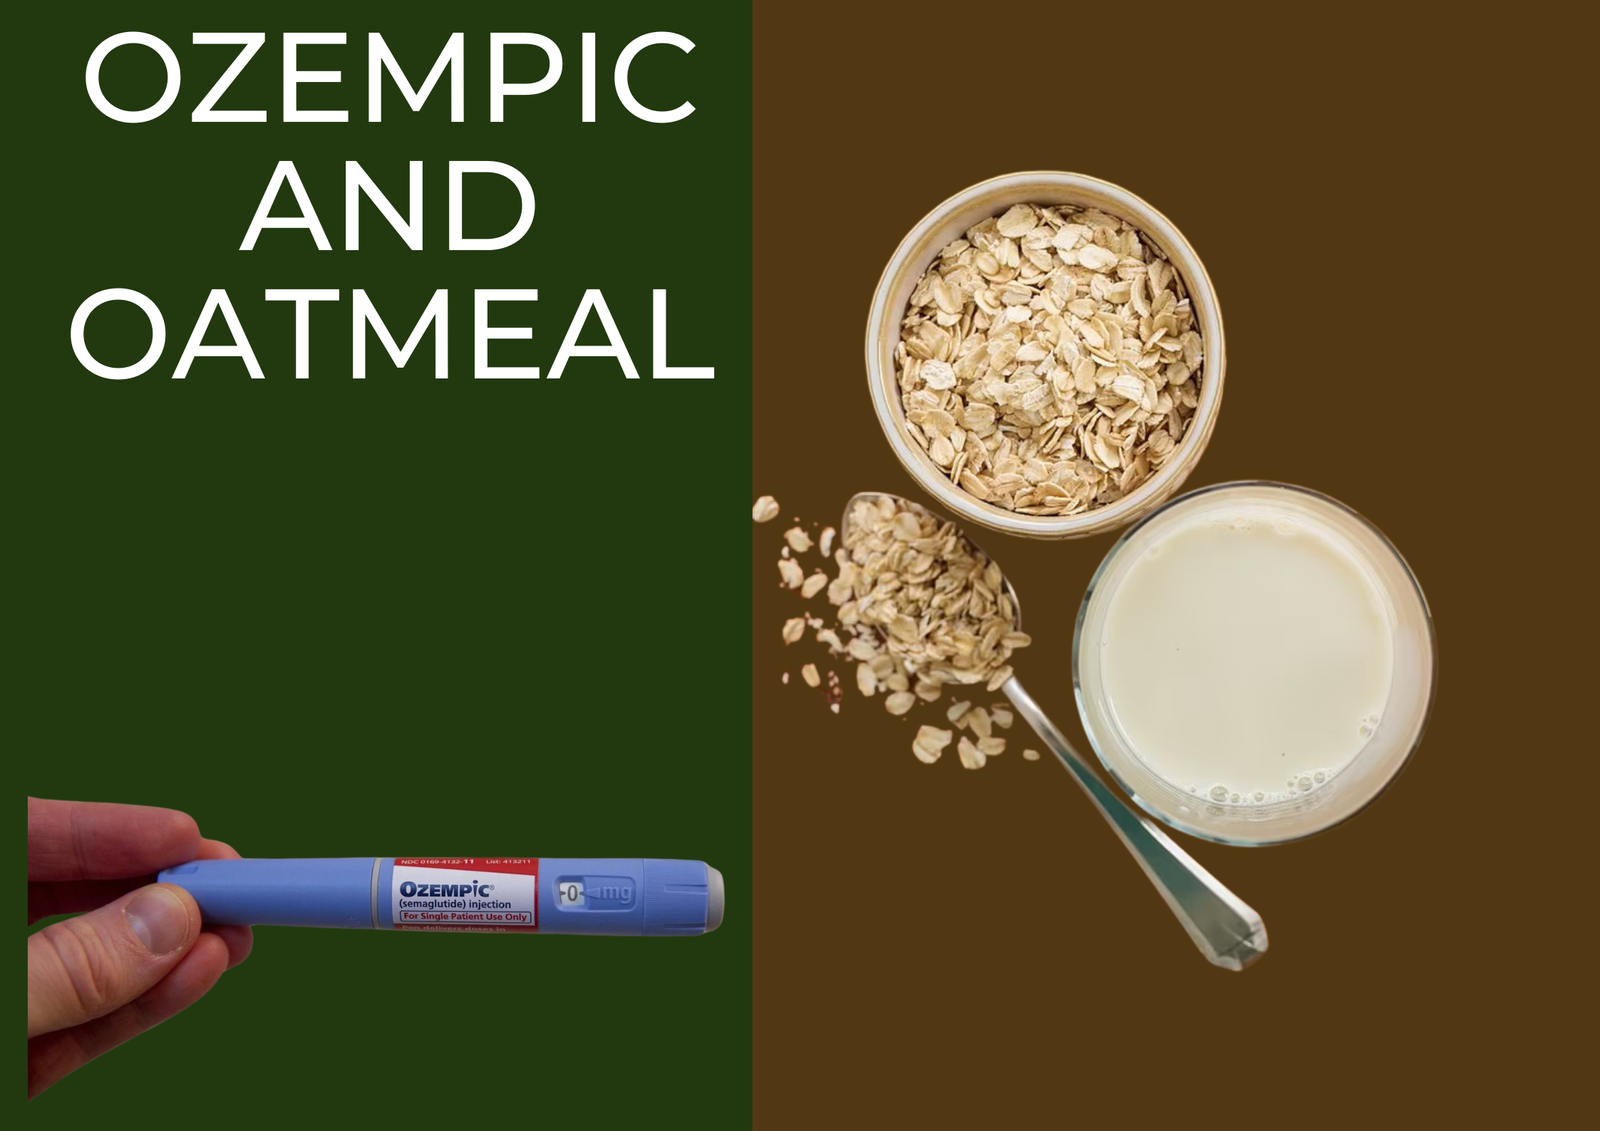 Ozempic and Oatmeal